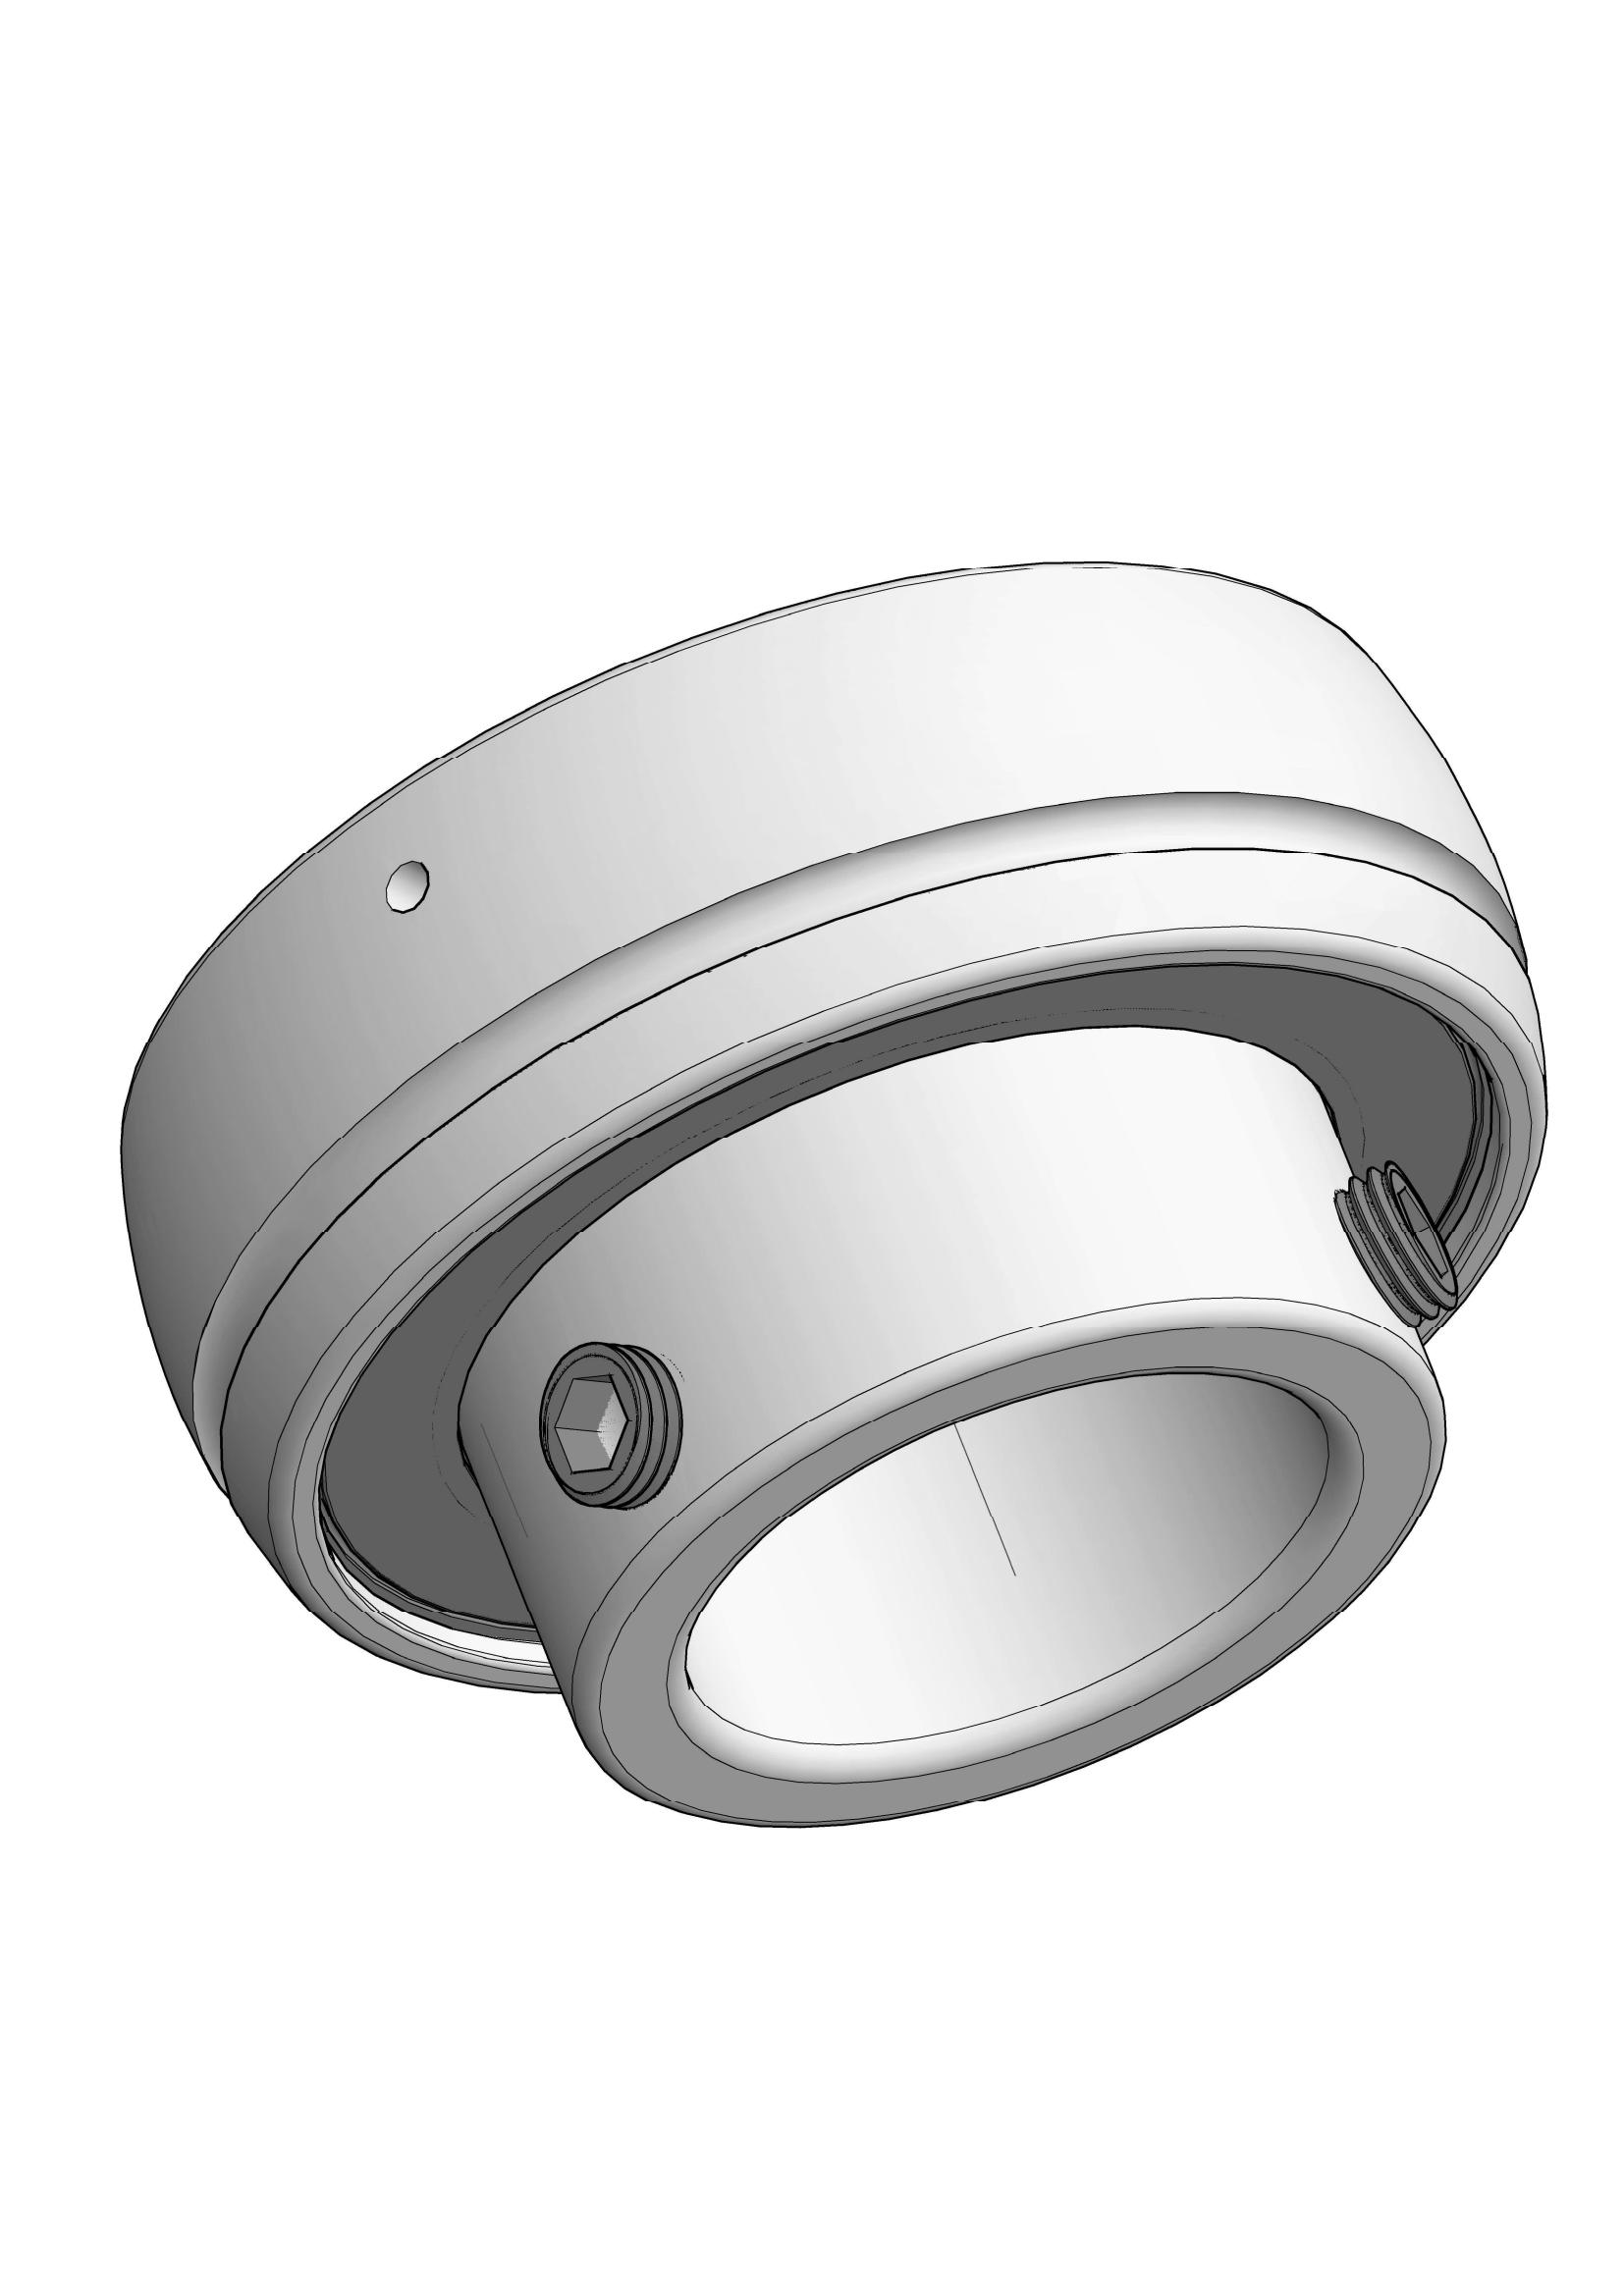 SB205-16 insert ball bearings with Eccentric Collar Lock with 1 inch Bore